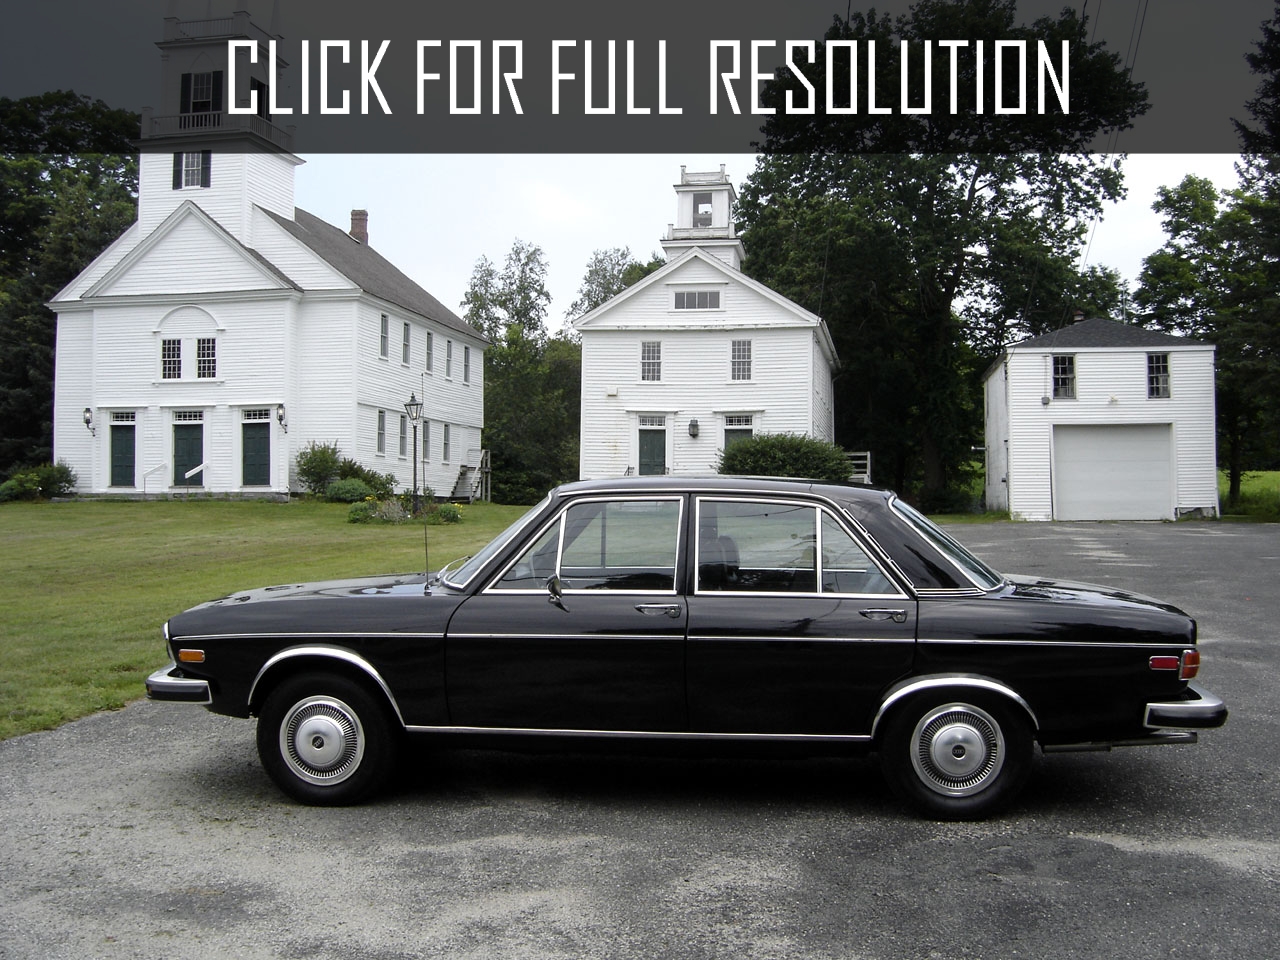 Audi 100 Ls 1974 - amazing photo gallery, some information ...